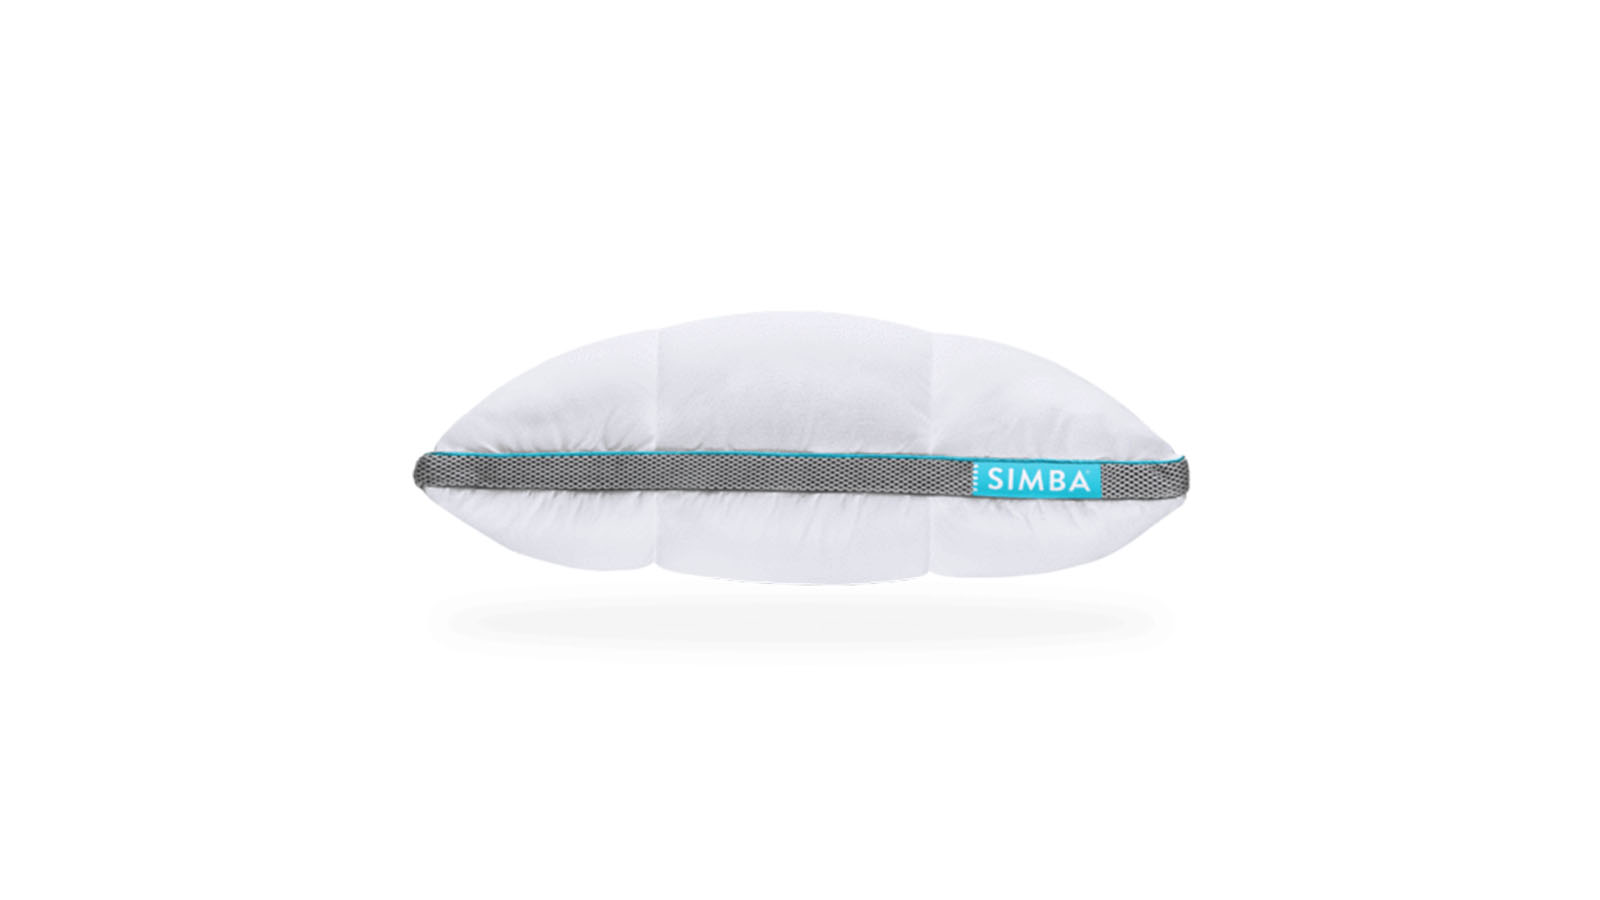 Simba Hybrid pillow, one of w&h's best pillows for neck pain